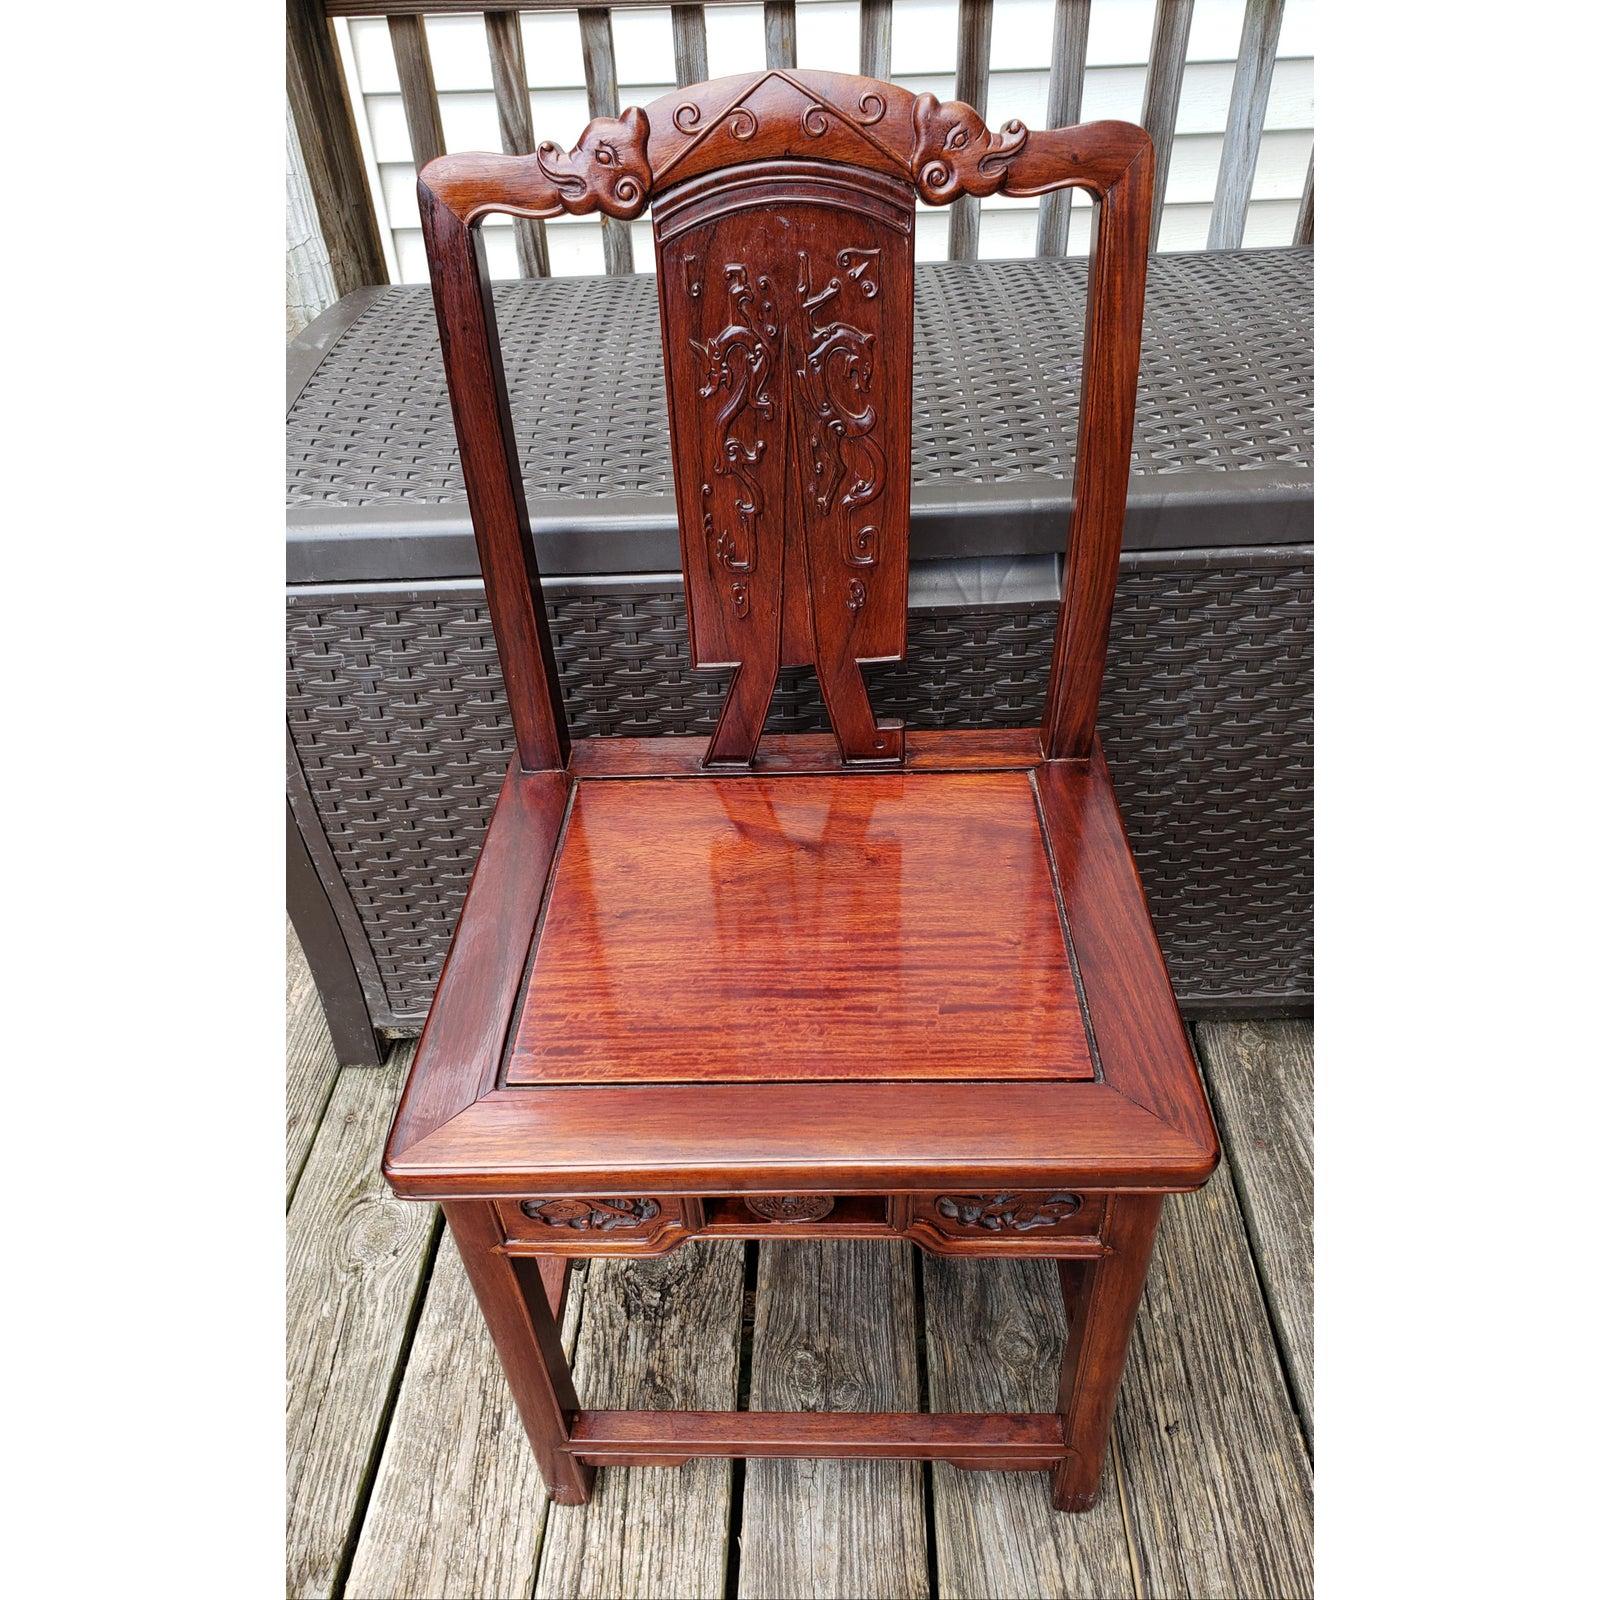 Pair of Traditional Chinese Antique hand carved solid rosewood chairs. Two Hand carved dragons on the back of each chairs additionally to amazing seat front carvings.
Chairs are in excellent condition and measure 18